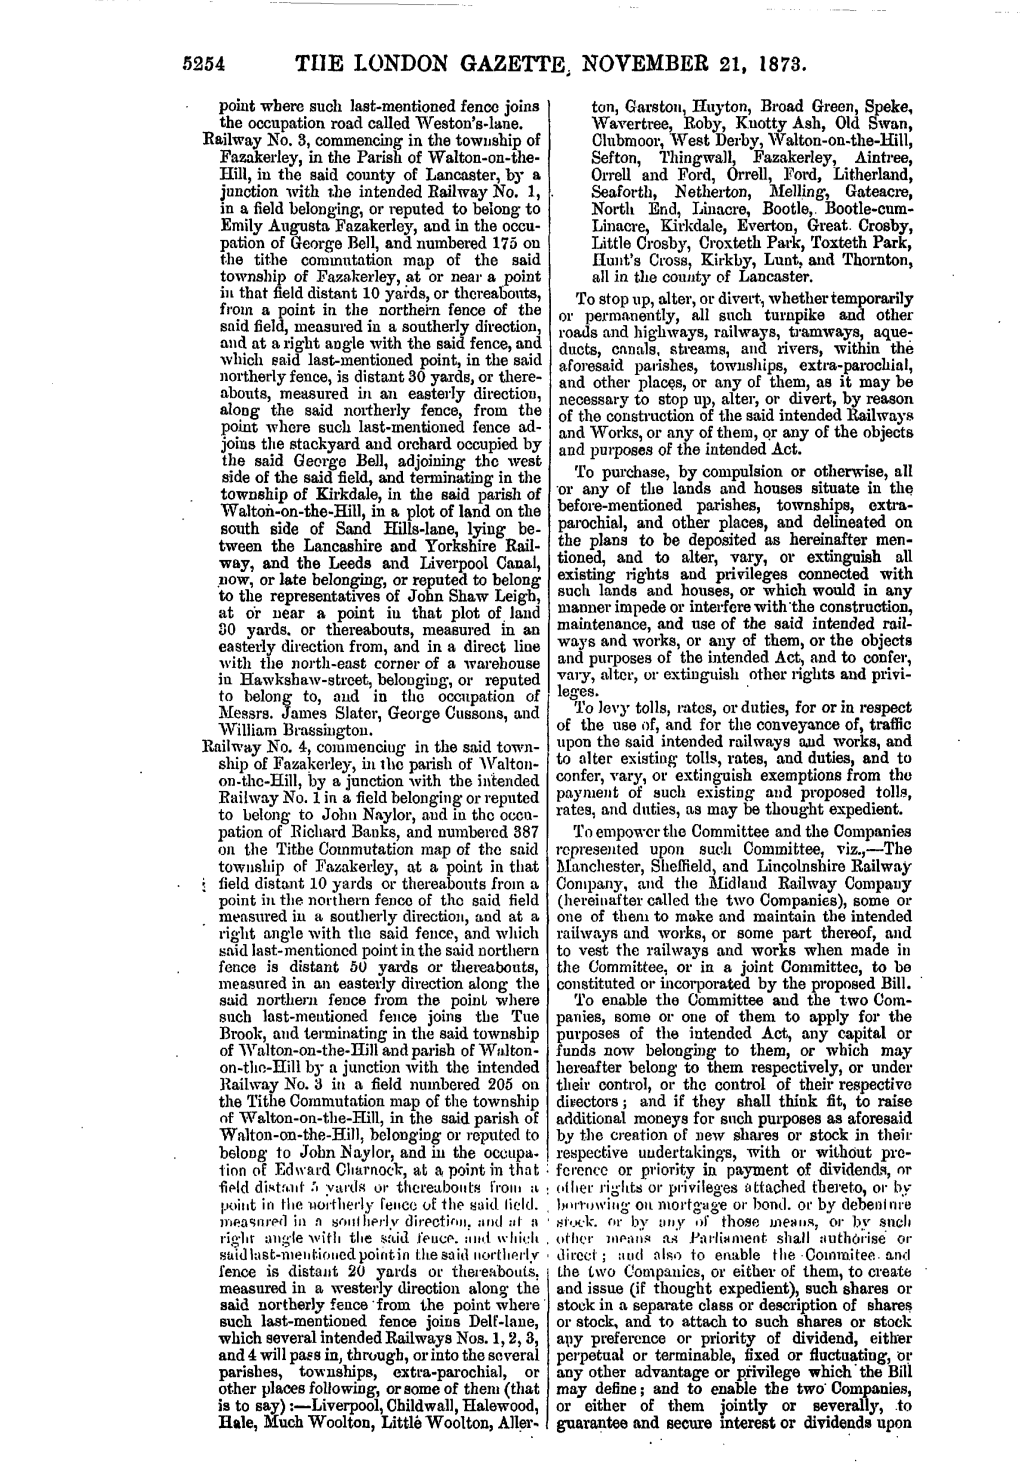 The London Gazette, Issue 24037, Page 5254